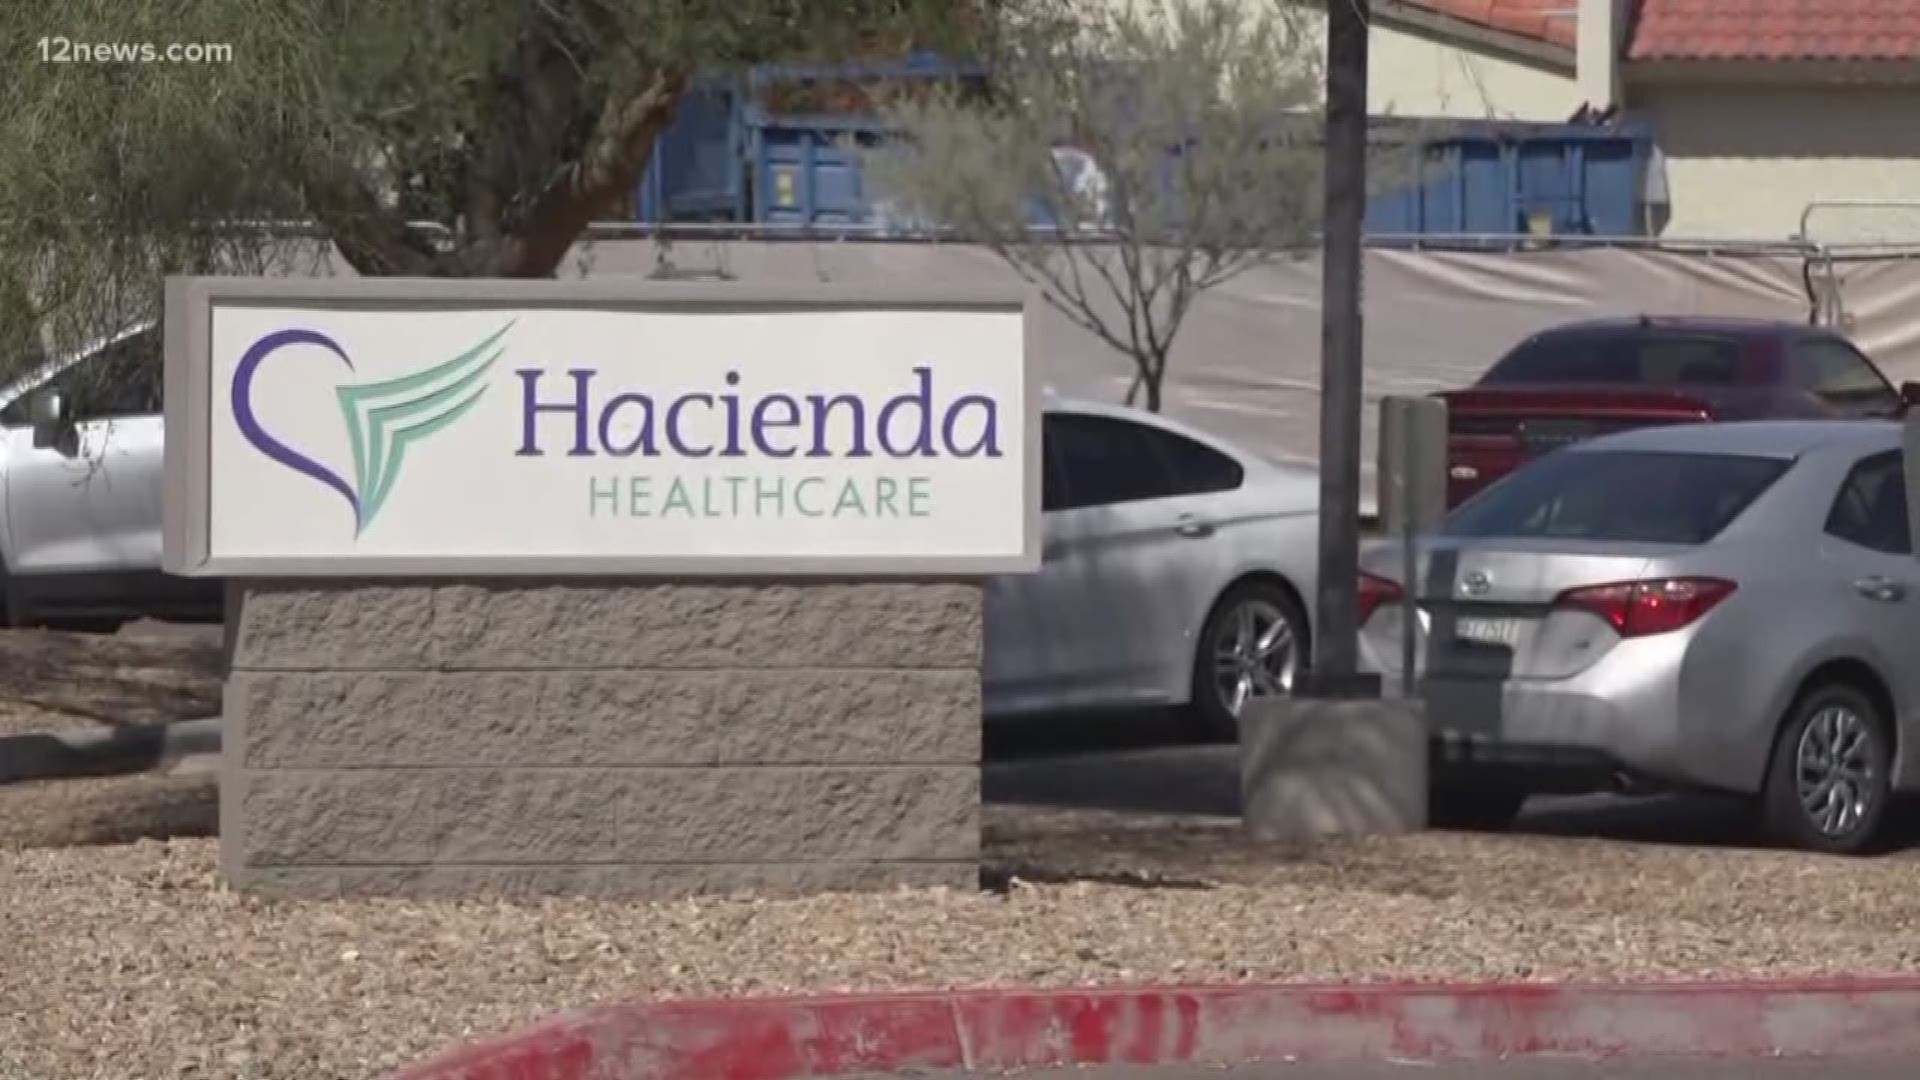 A police report released by Phoneix police shows the security guards at Hacienda Healthcare told police security could have definitely been better, but the staff told police there were safeguards in place to check on the patients. The report also shows that people noticed the suspect, Nathan Sutherland, "let himself go" in the time leading up to the baby being born.